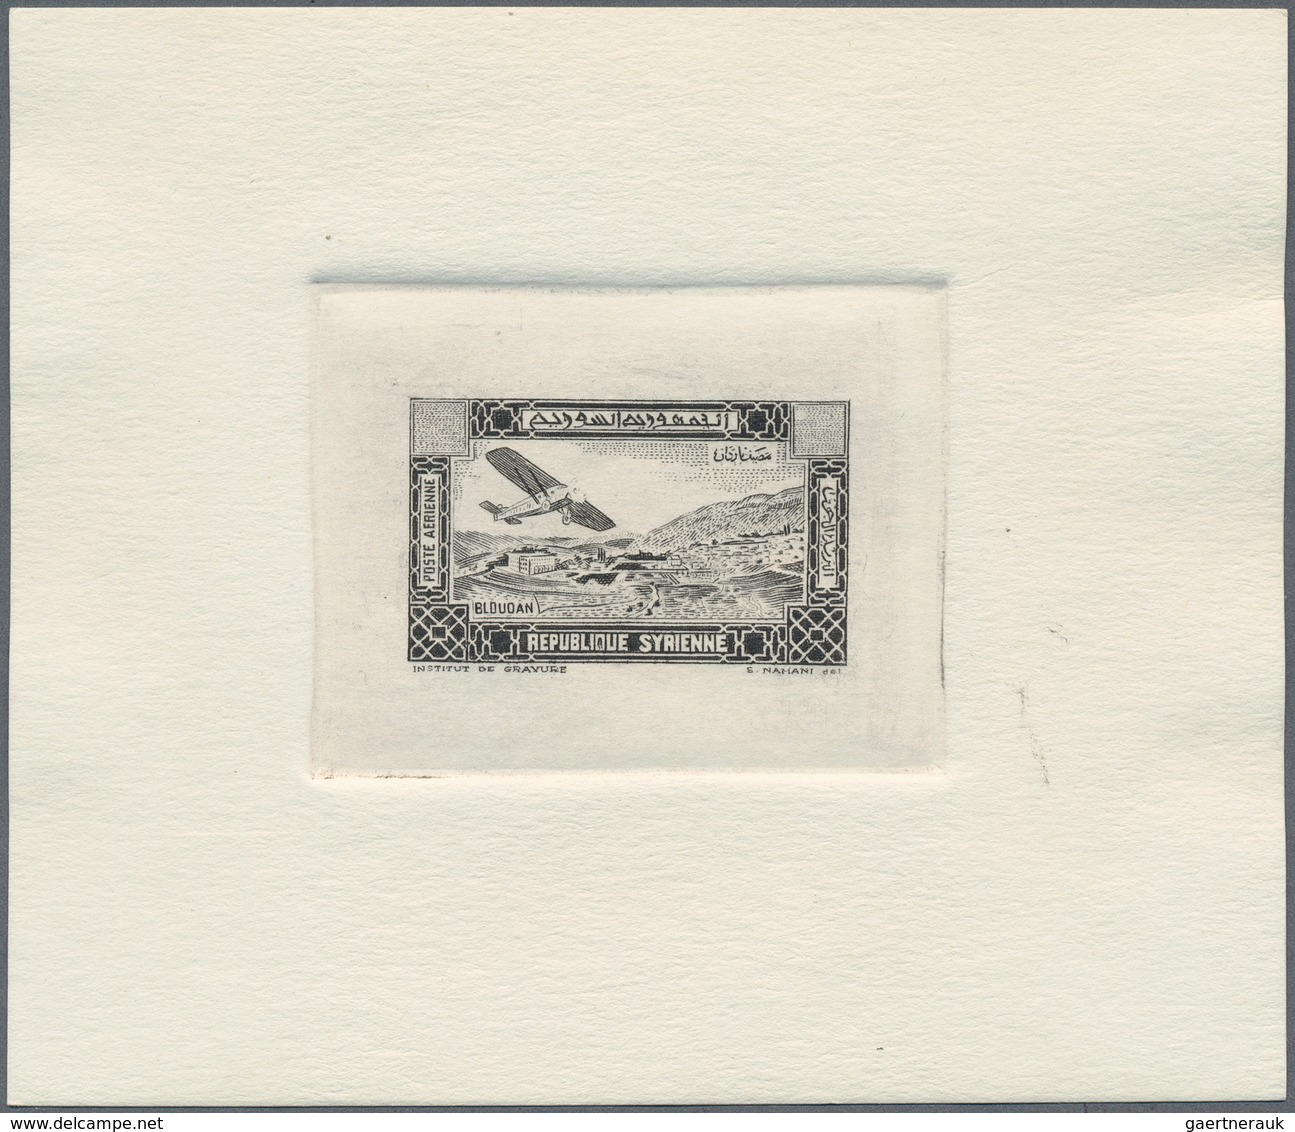 09876 Syrien: 1934, 10 Years Republic Air Mail Issue Three Sunk Die Proofs Without Value On Thick Paper, C - Syrie